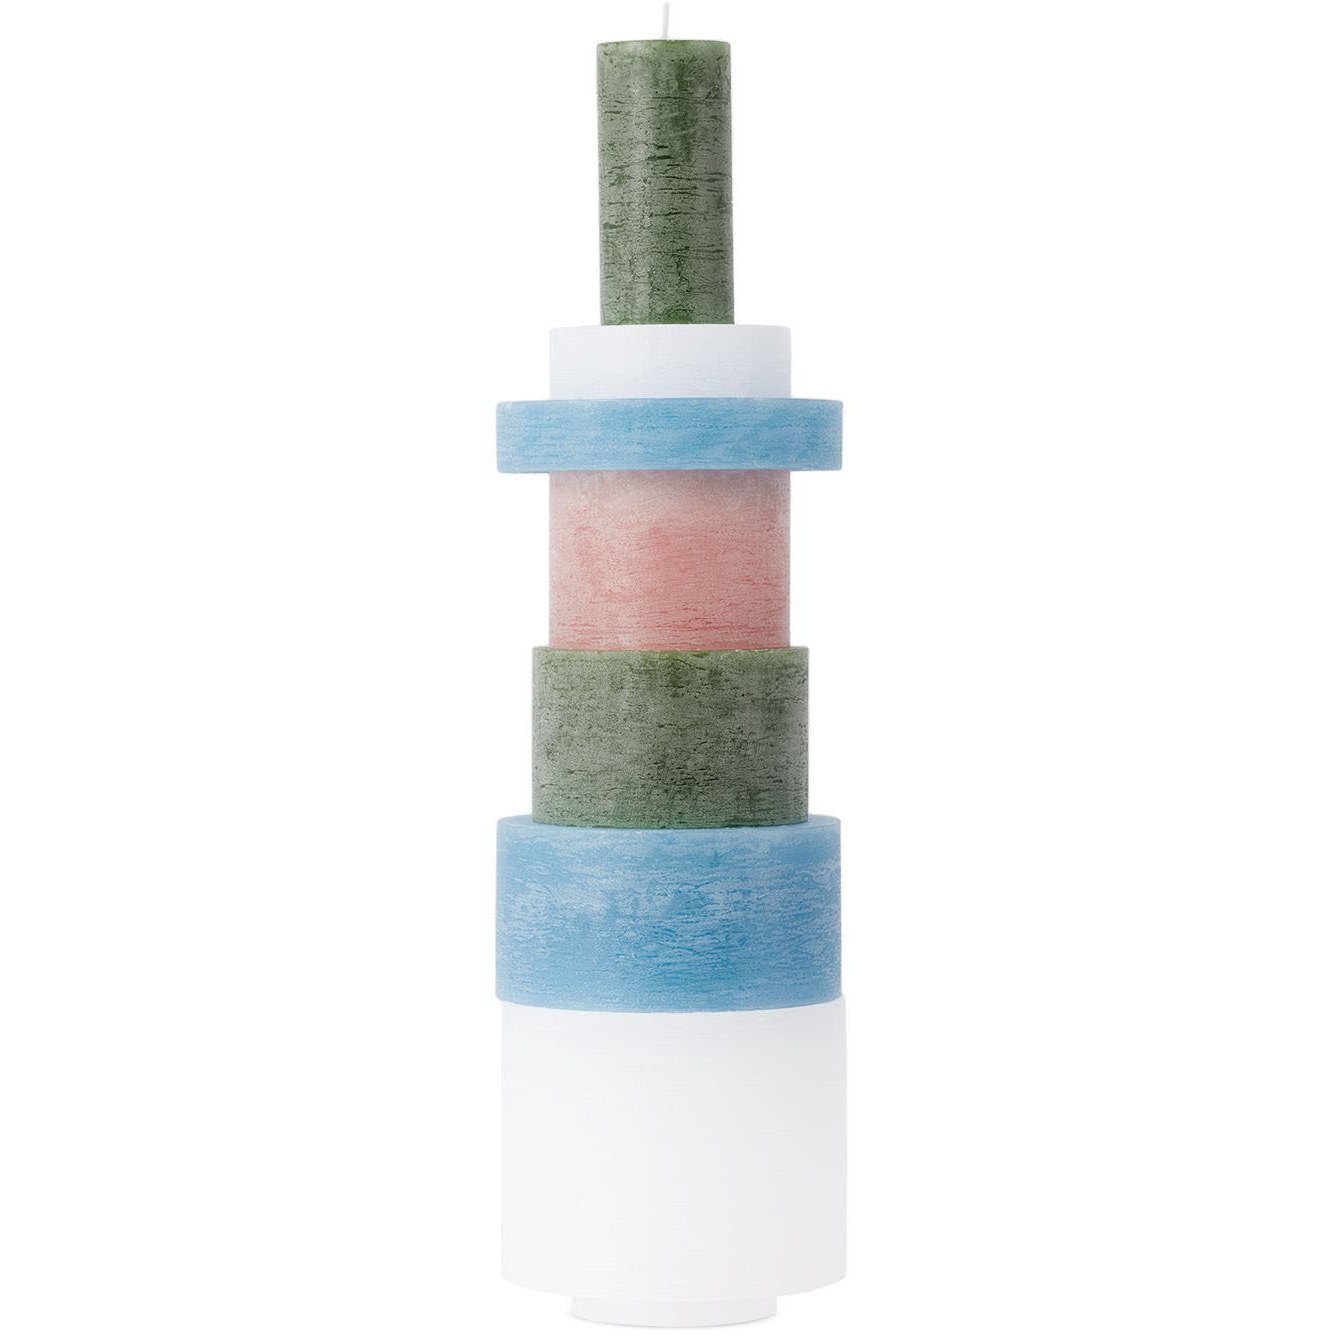 Stan Editions Multicolor Stack 07 Candle Set - image 1